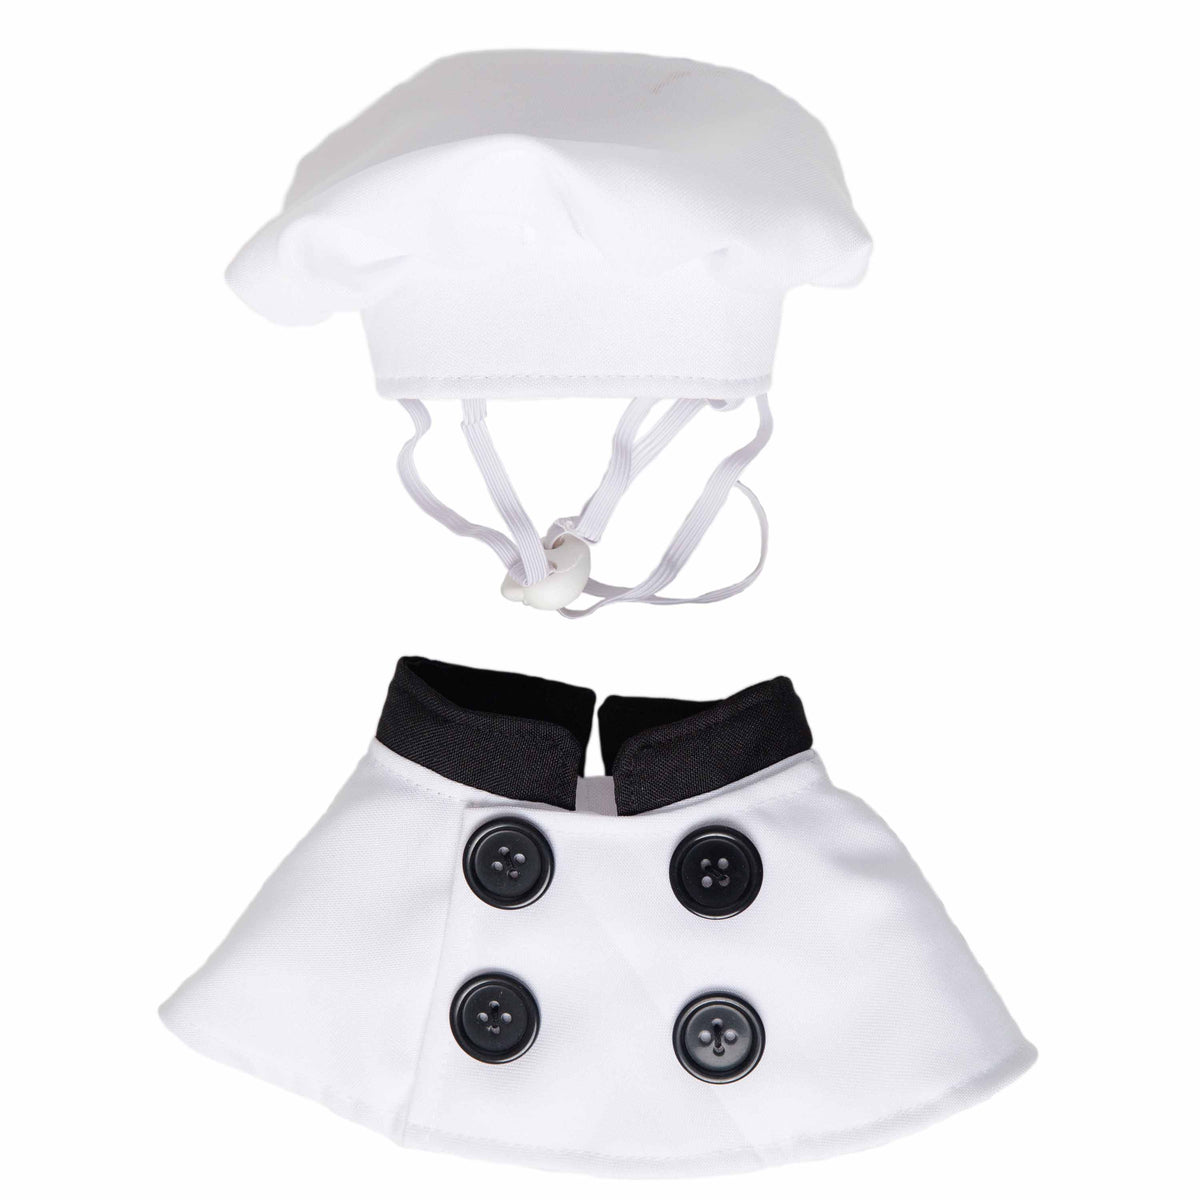 Chef Uniform Costume - 3 Red Rovers